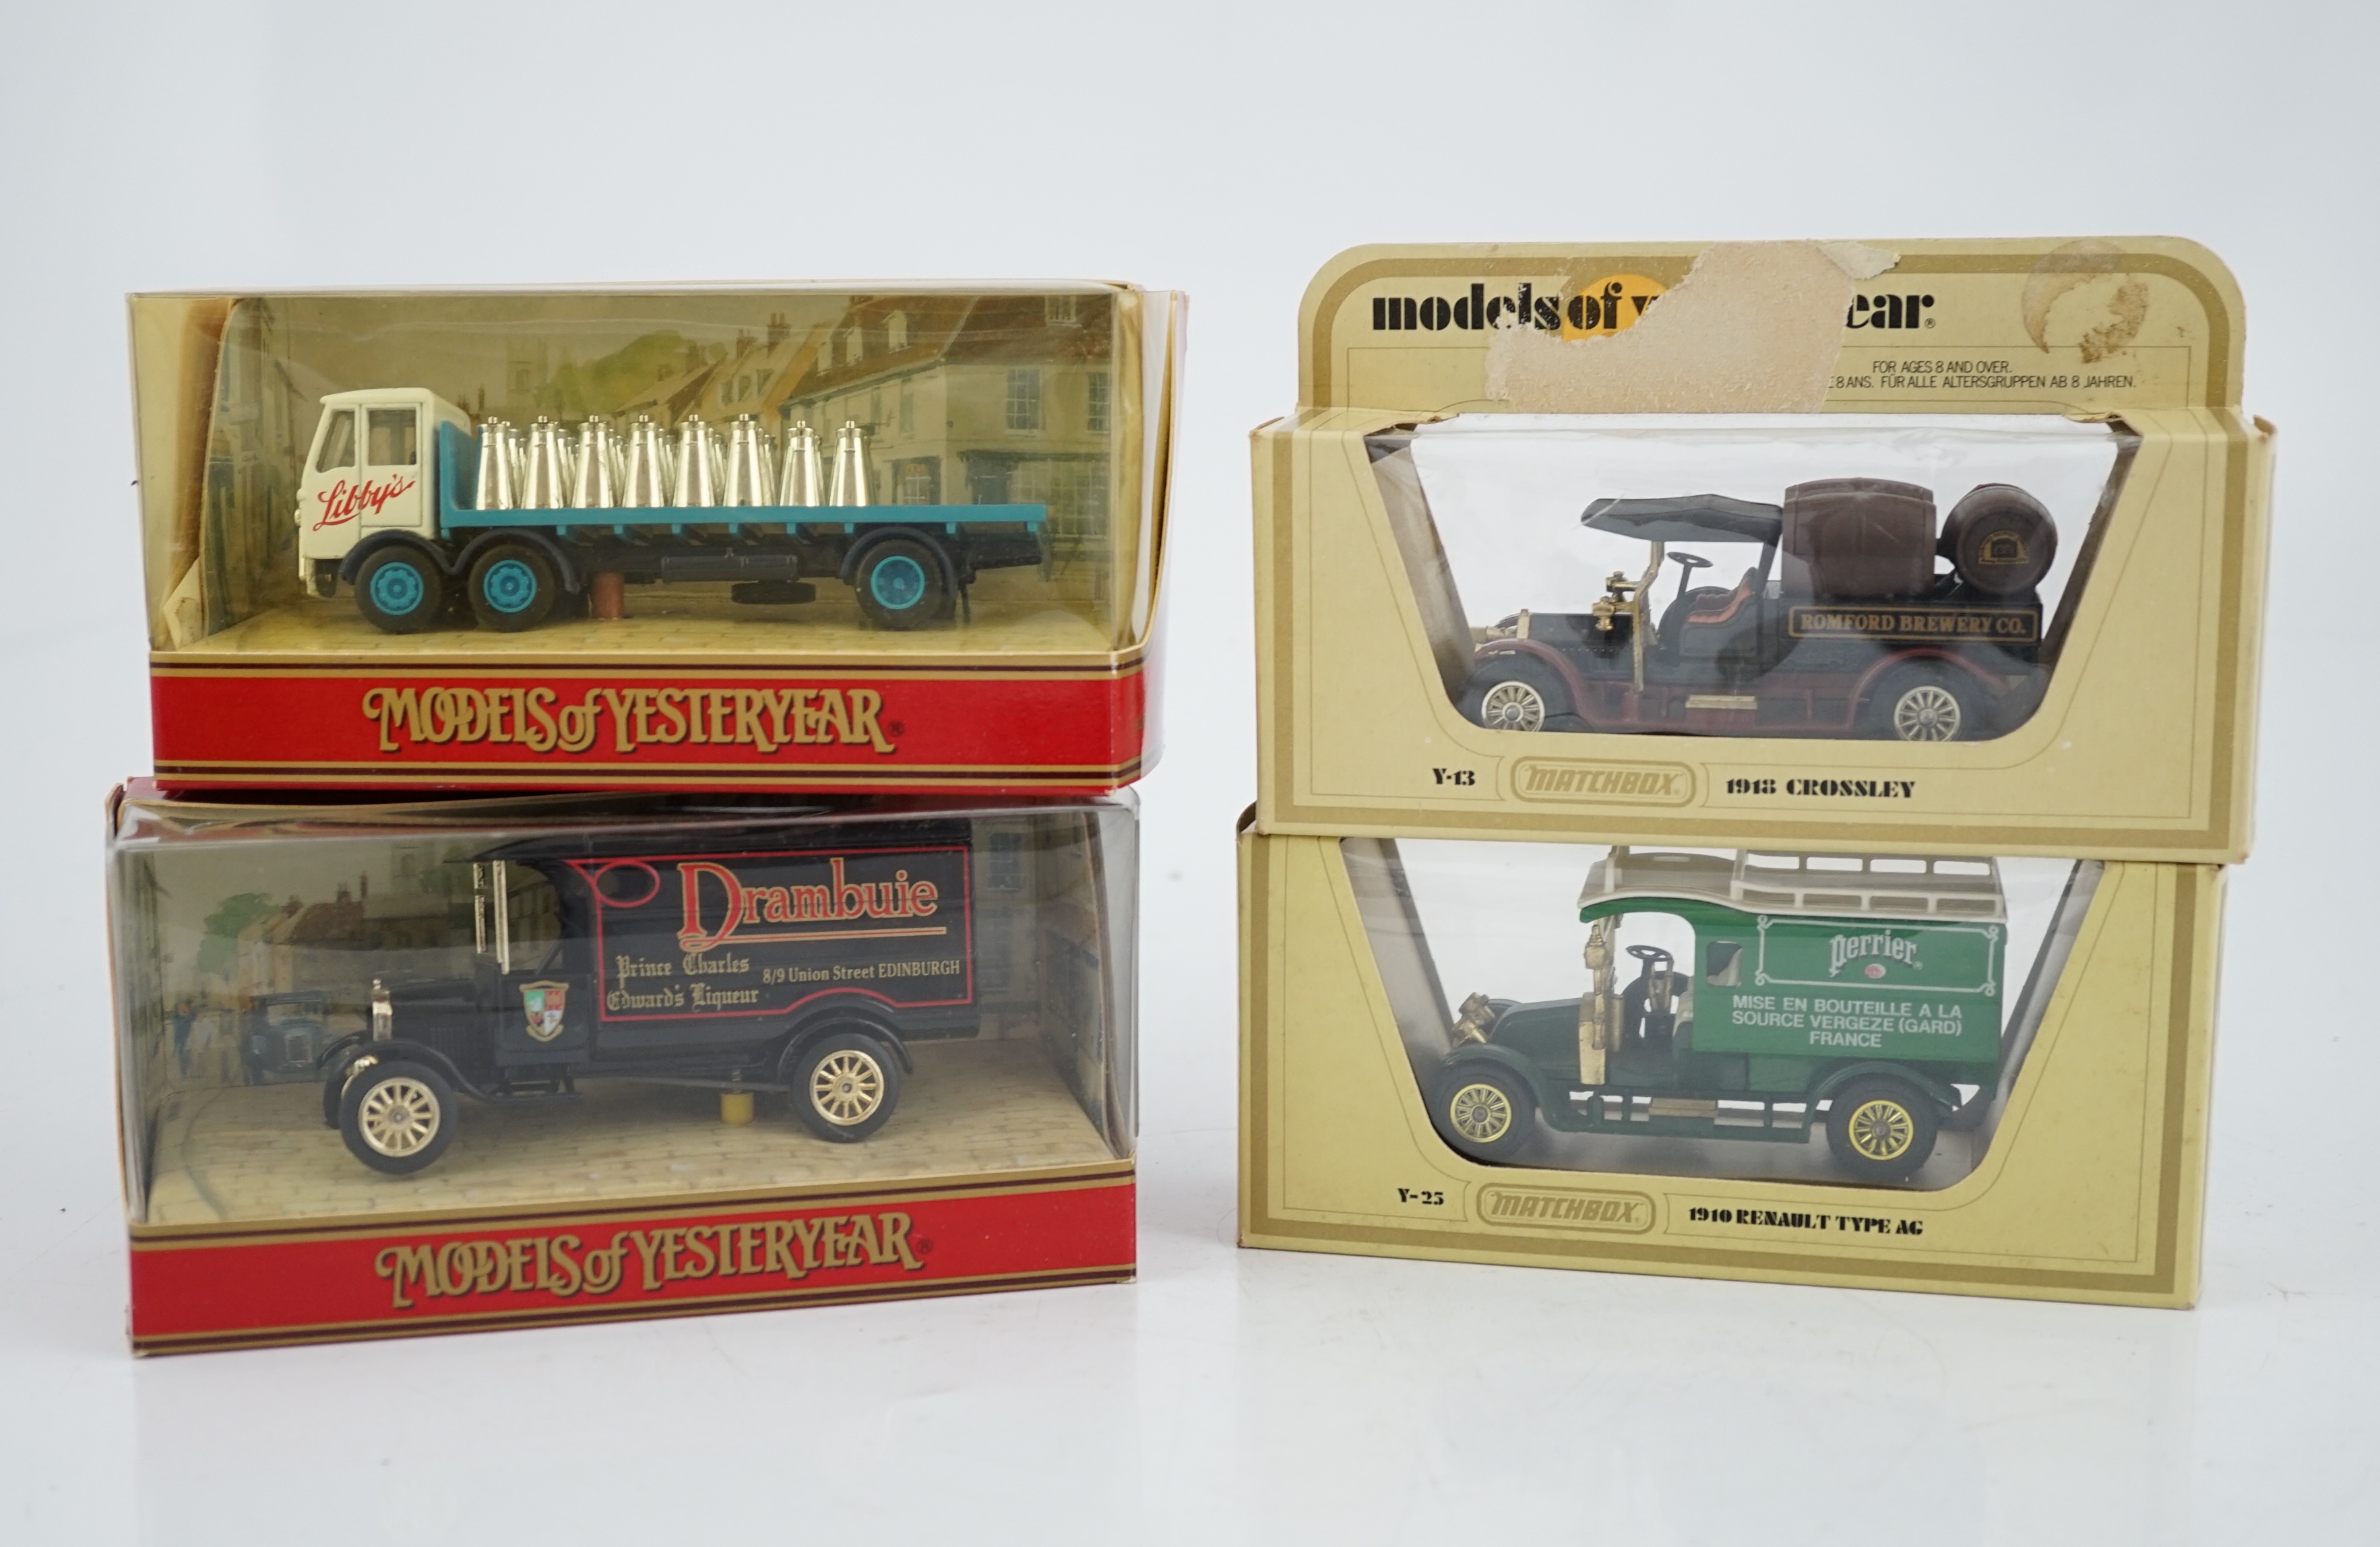 Sixty-six Matchbox Models of Yesteryear, in cream or maroon era boxes, including cars, commercial